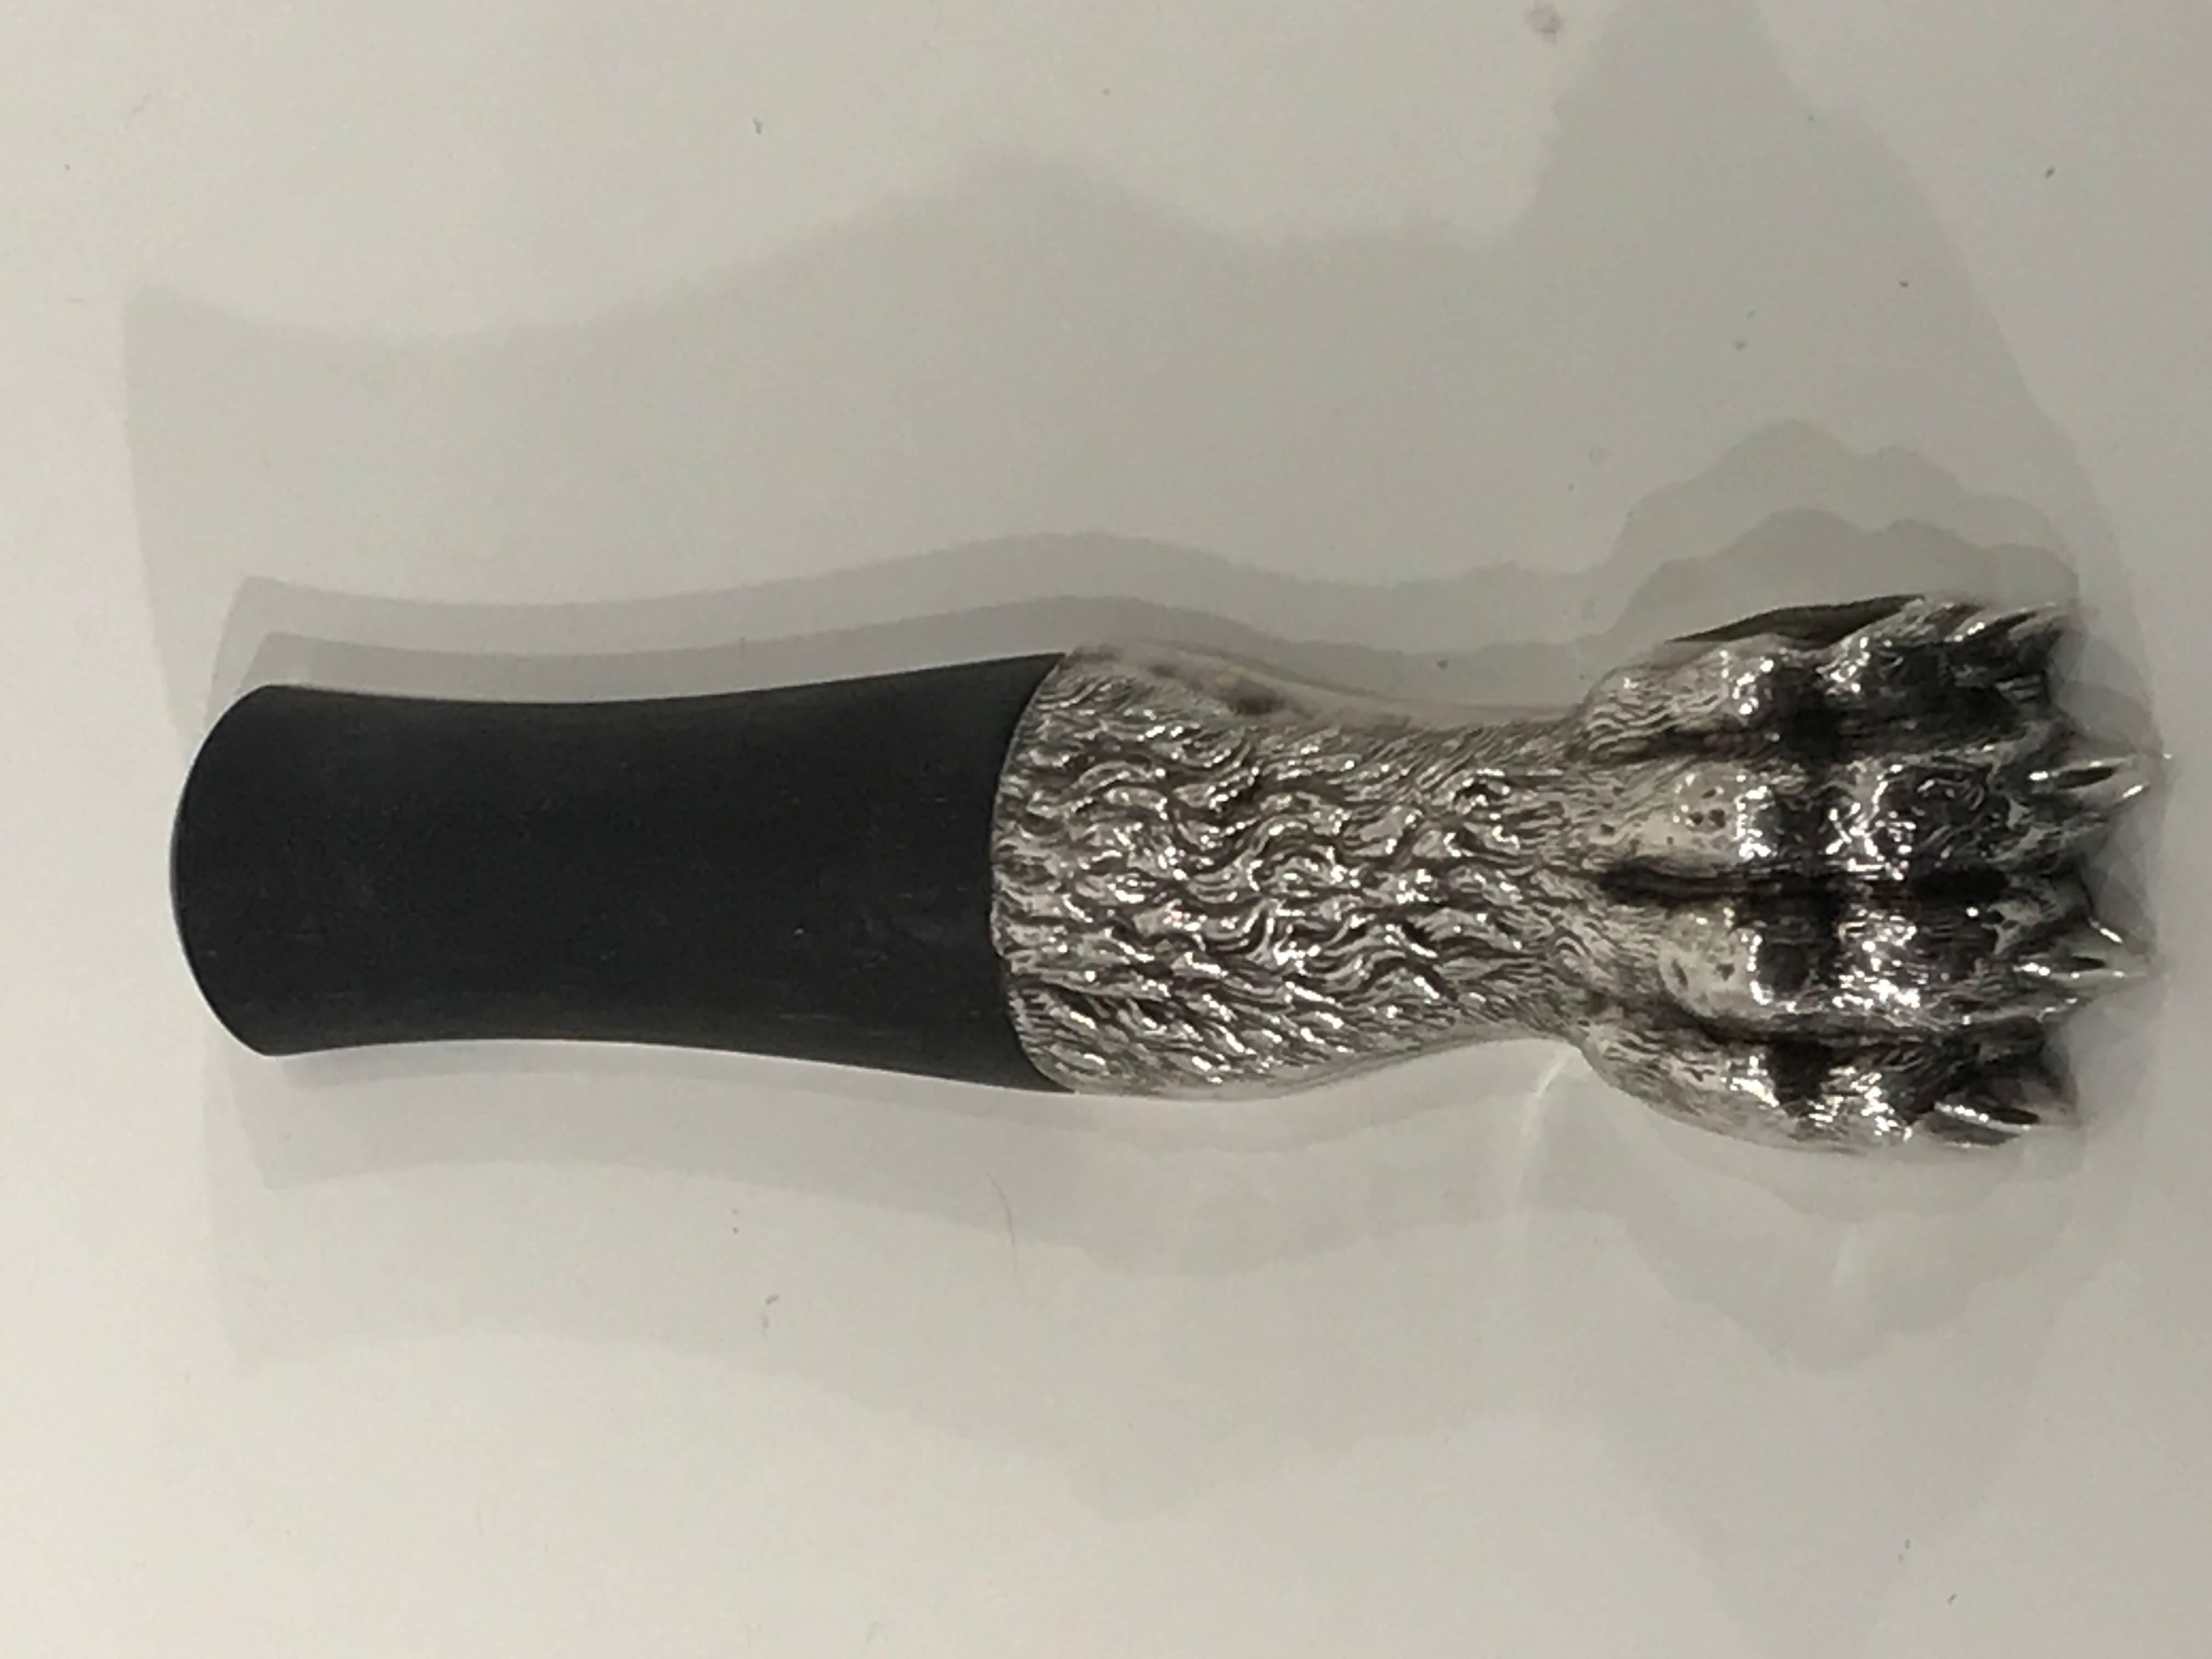 Exquisite Art Deco lion paw bottle opener by Ravinet D'Enfert, realistically cast in silvered metal of a lion paw, with carved ebony handle. Stamped and hallmarked Ravinet D'Enfert - Made in France.